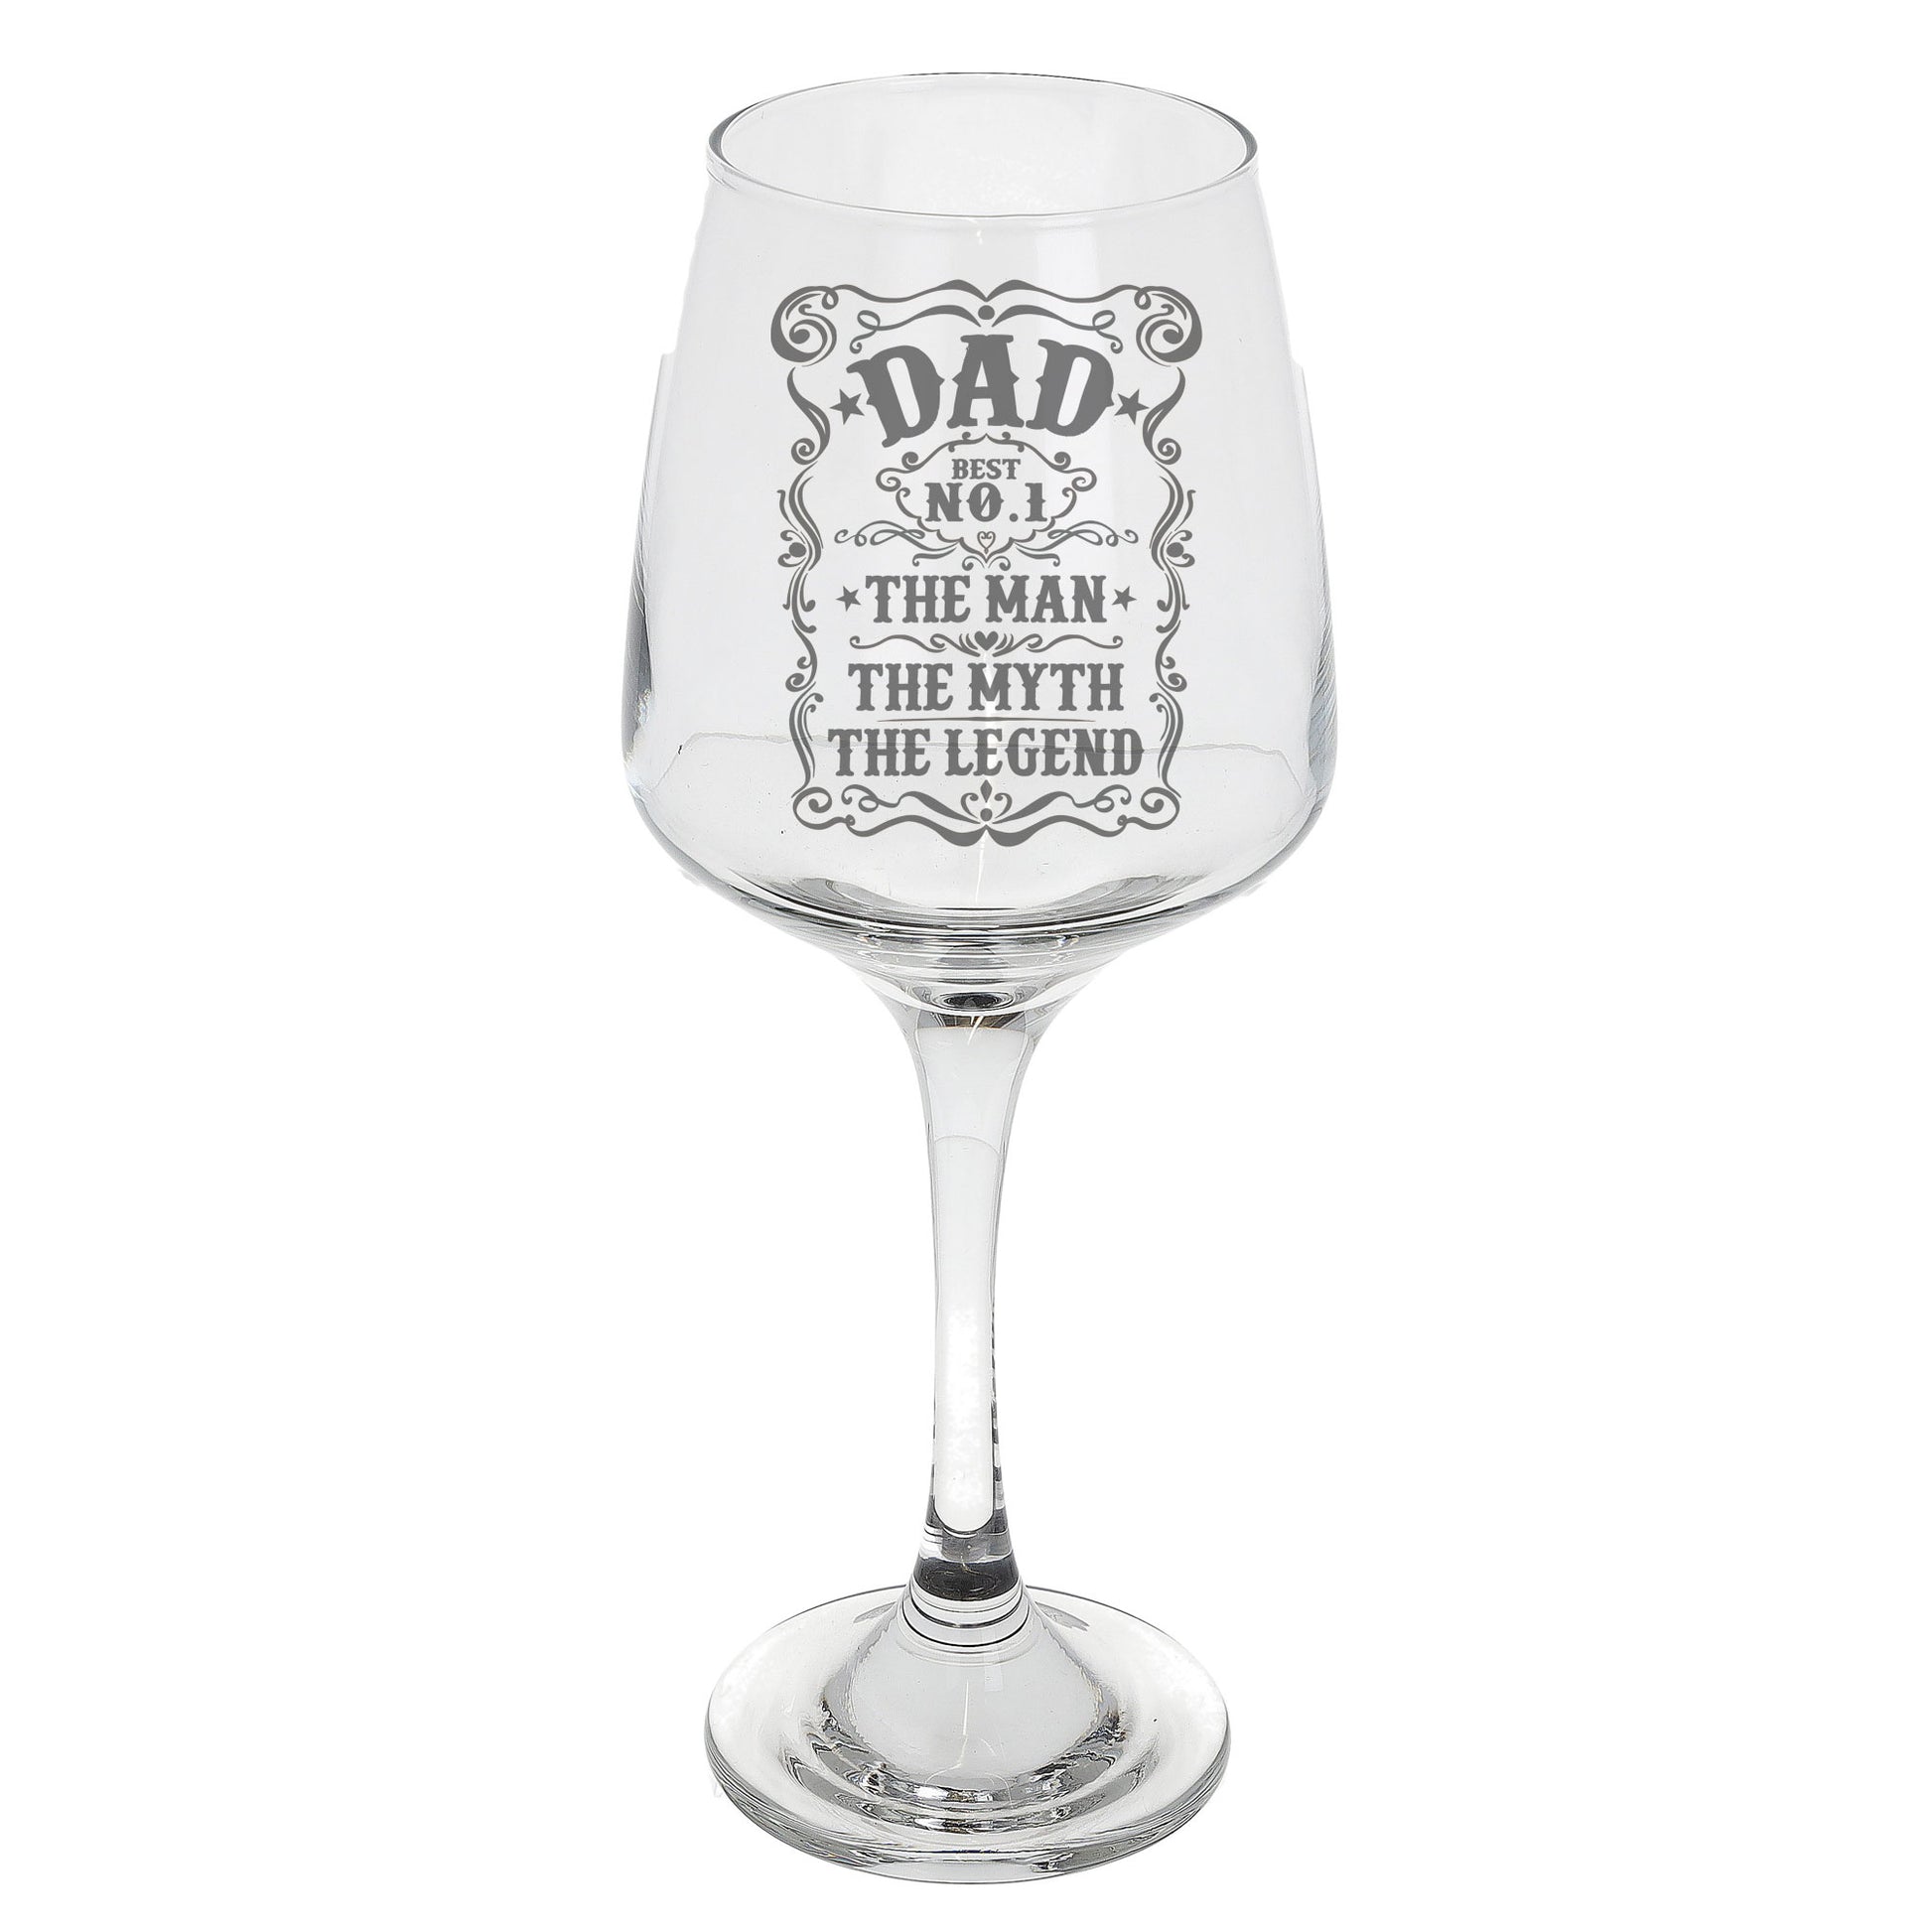 Dad The Man The Myth The Legend Engraved Wine Glass and/or Coaster Set  - Always Looking Good - Wine Glass Only  